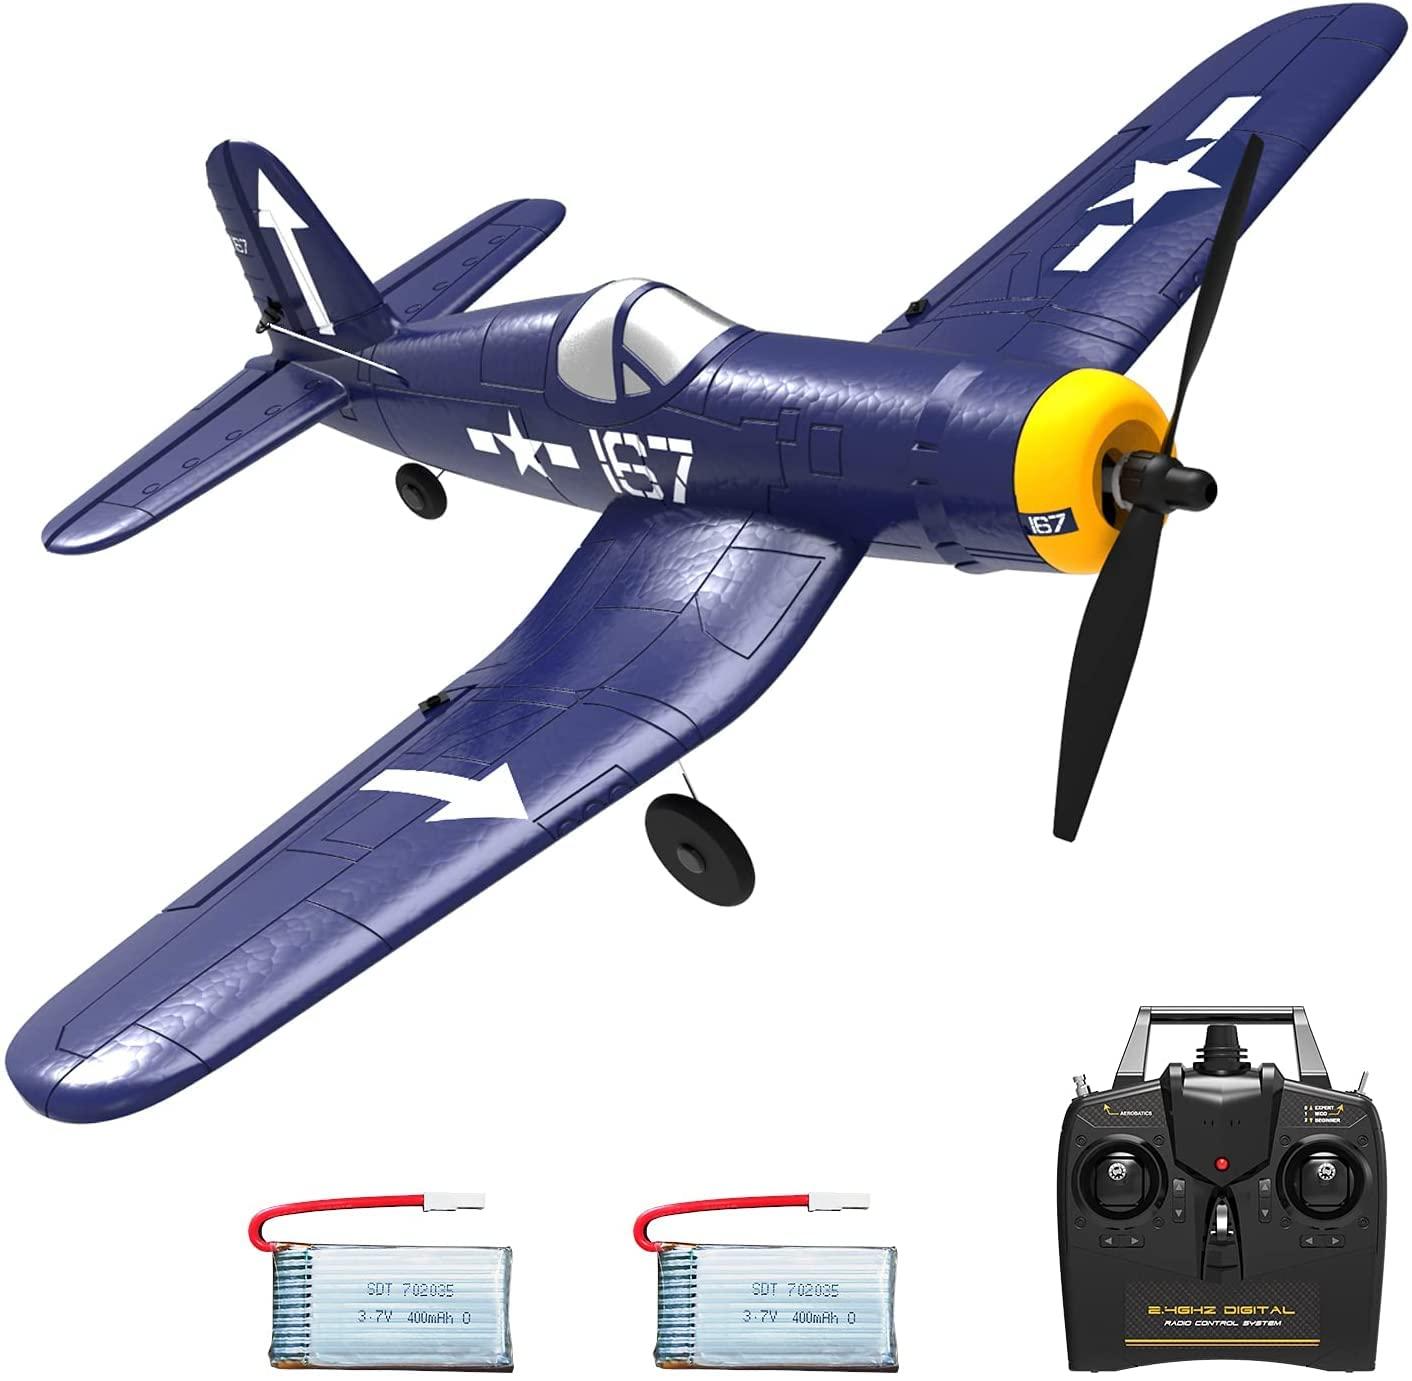 Volantexrc 4 Ch Rc Airplane: Affordable and Upgradable: The VolantexRC 4 Ch RC Airplane